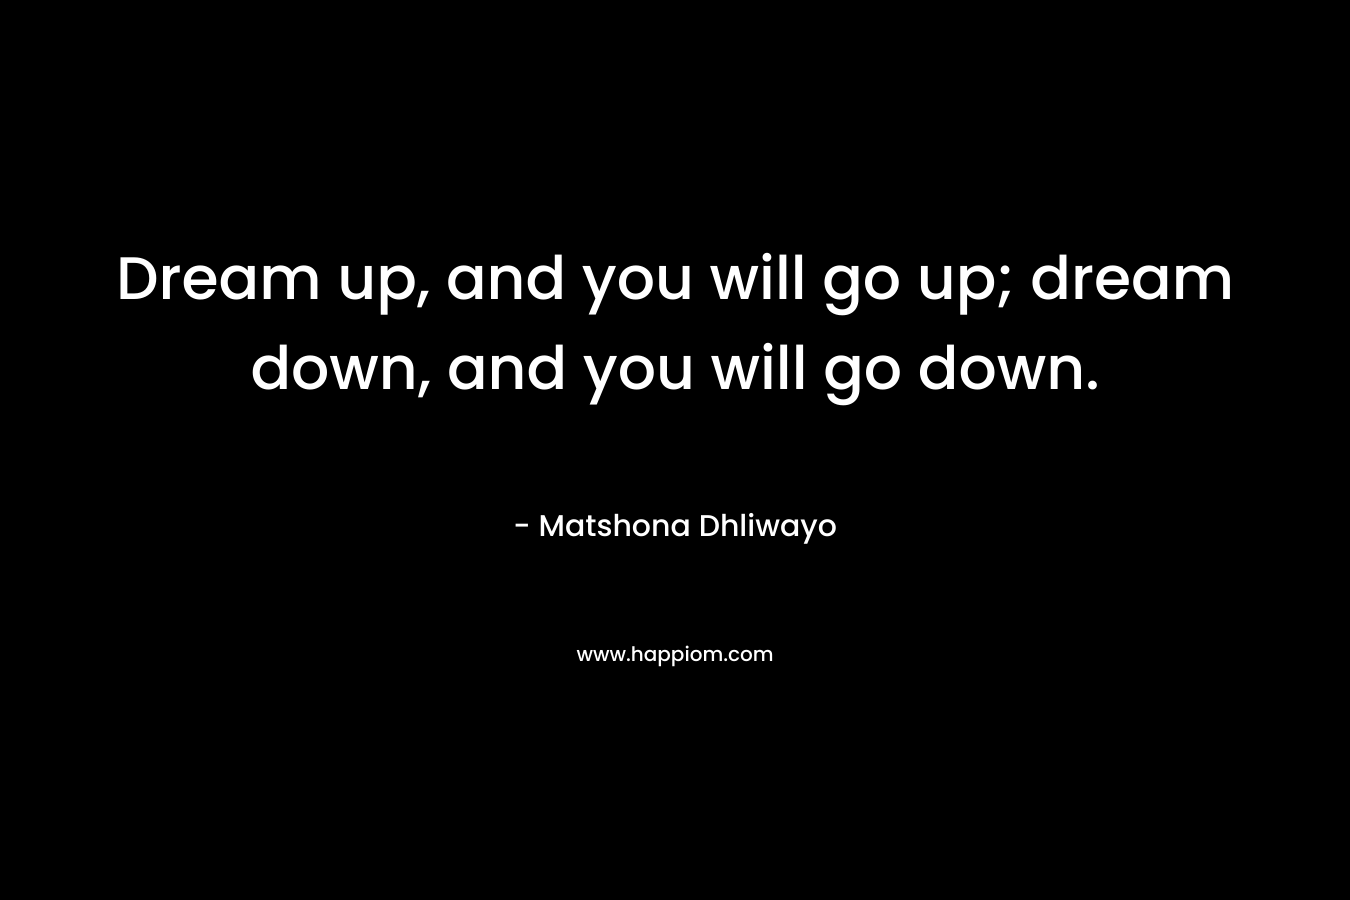 Dream up, and you will go up; dream down, and you will go down.